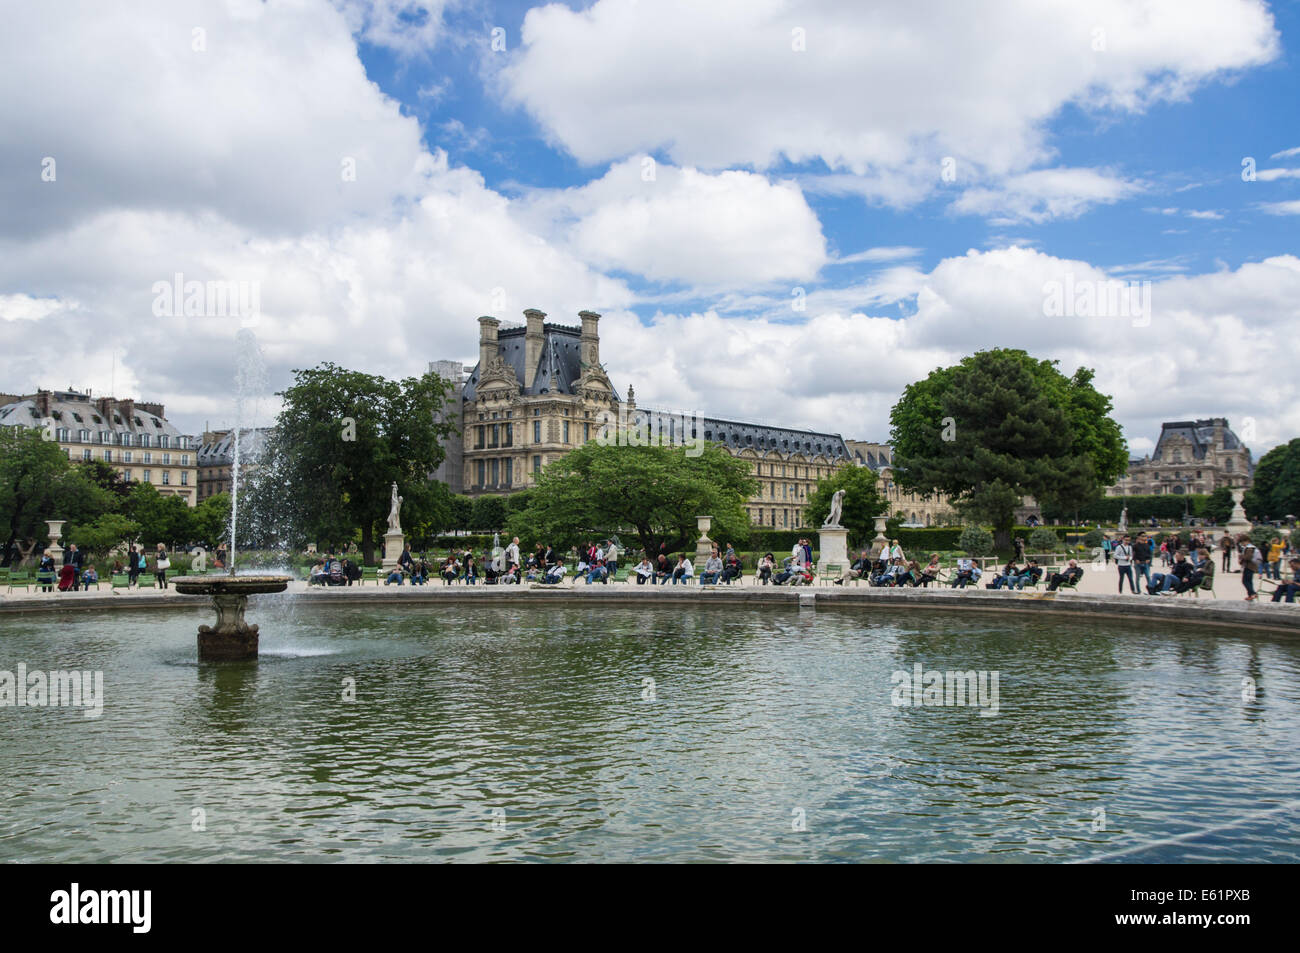 Tourists and visitors at the Grand Bassin Rond at the Tuileries Garden [Jardin des Tuileries] in Paris, France Stock Photo